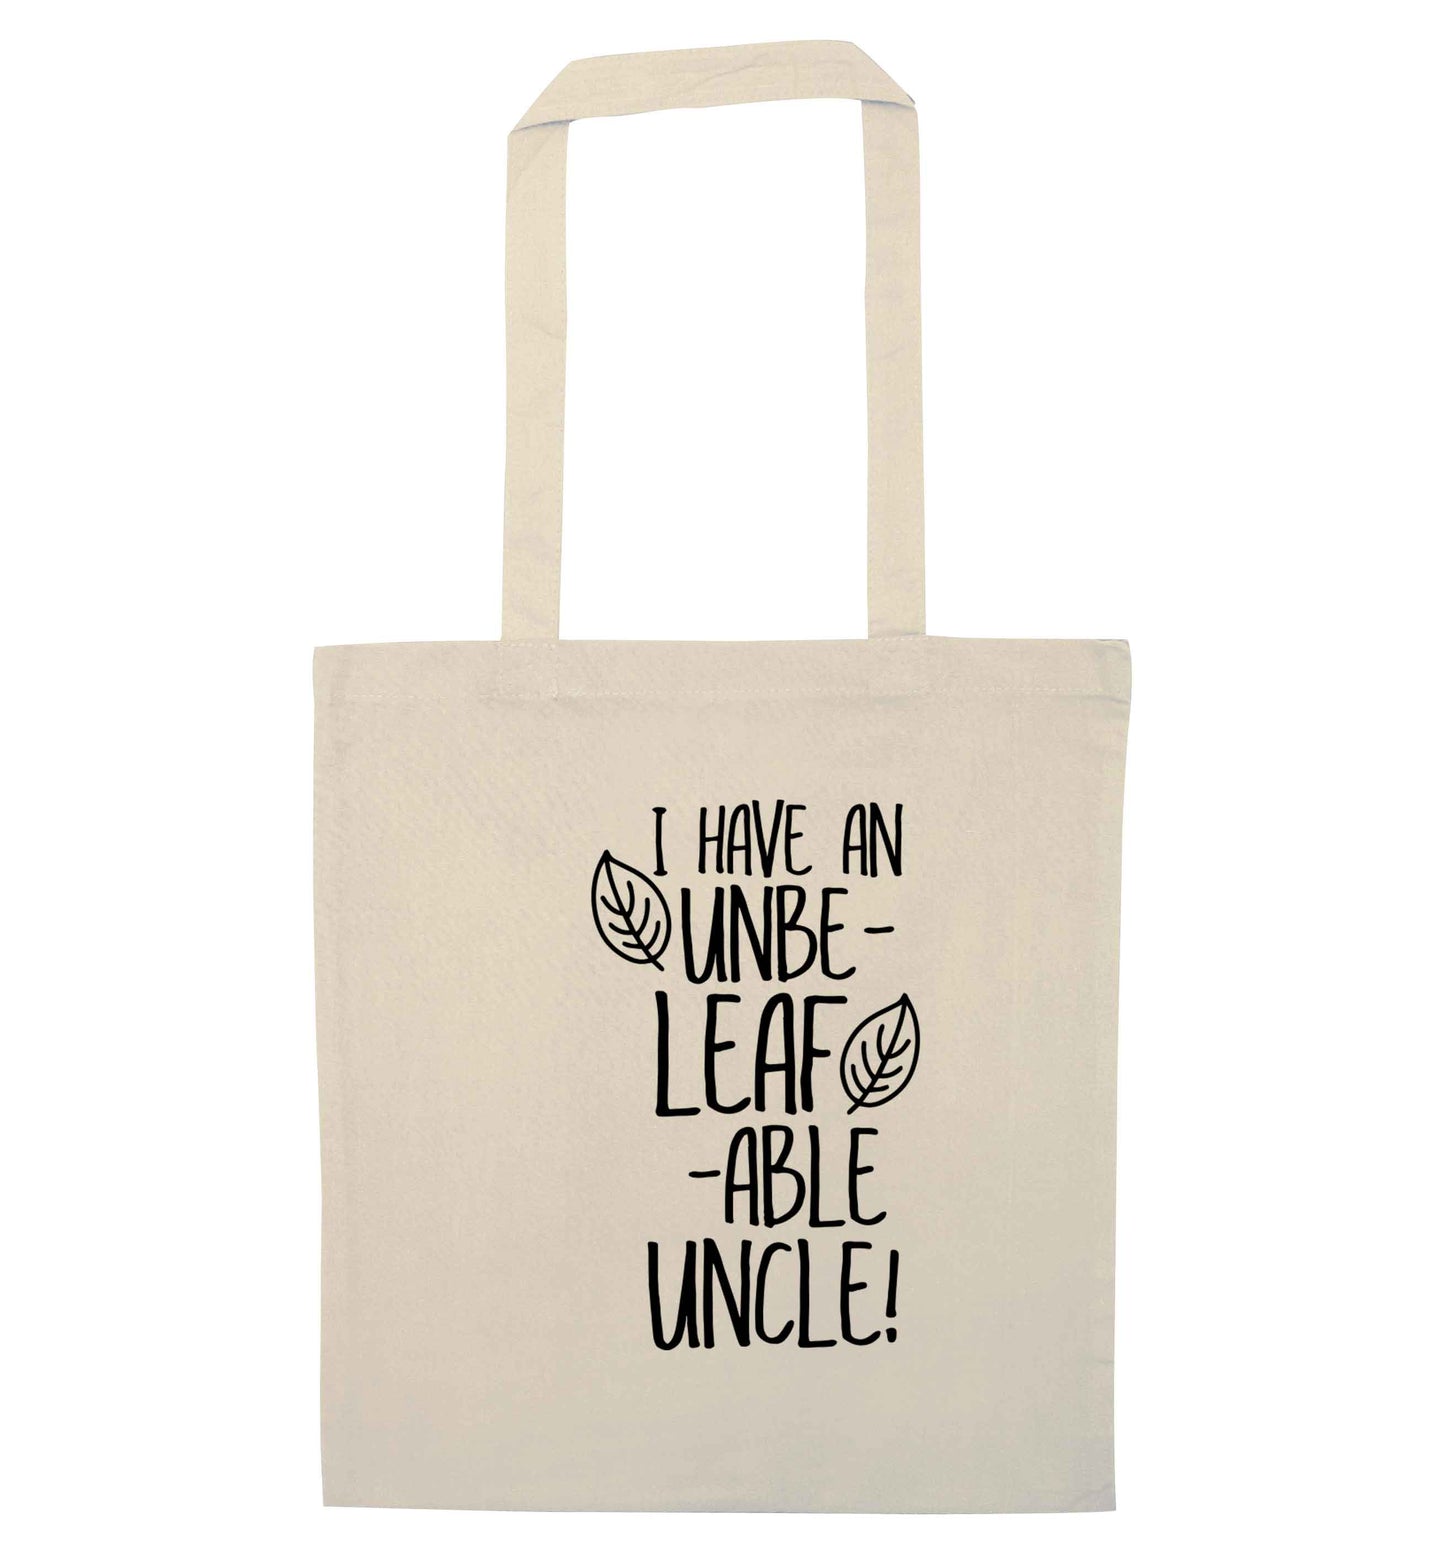 I have an unbe-leaf-able uncle natural tote bag